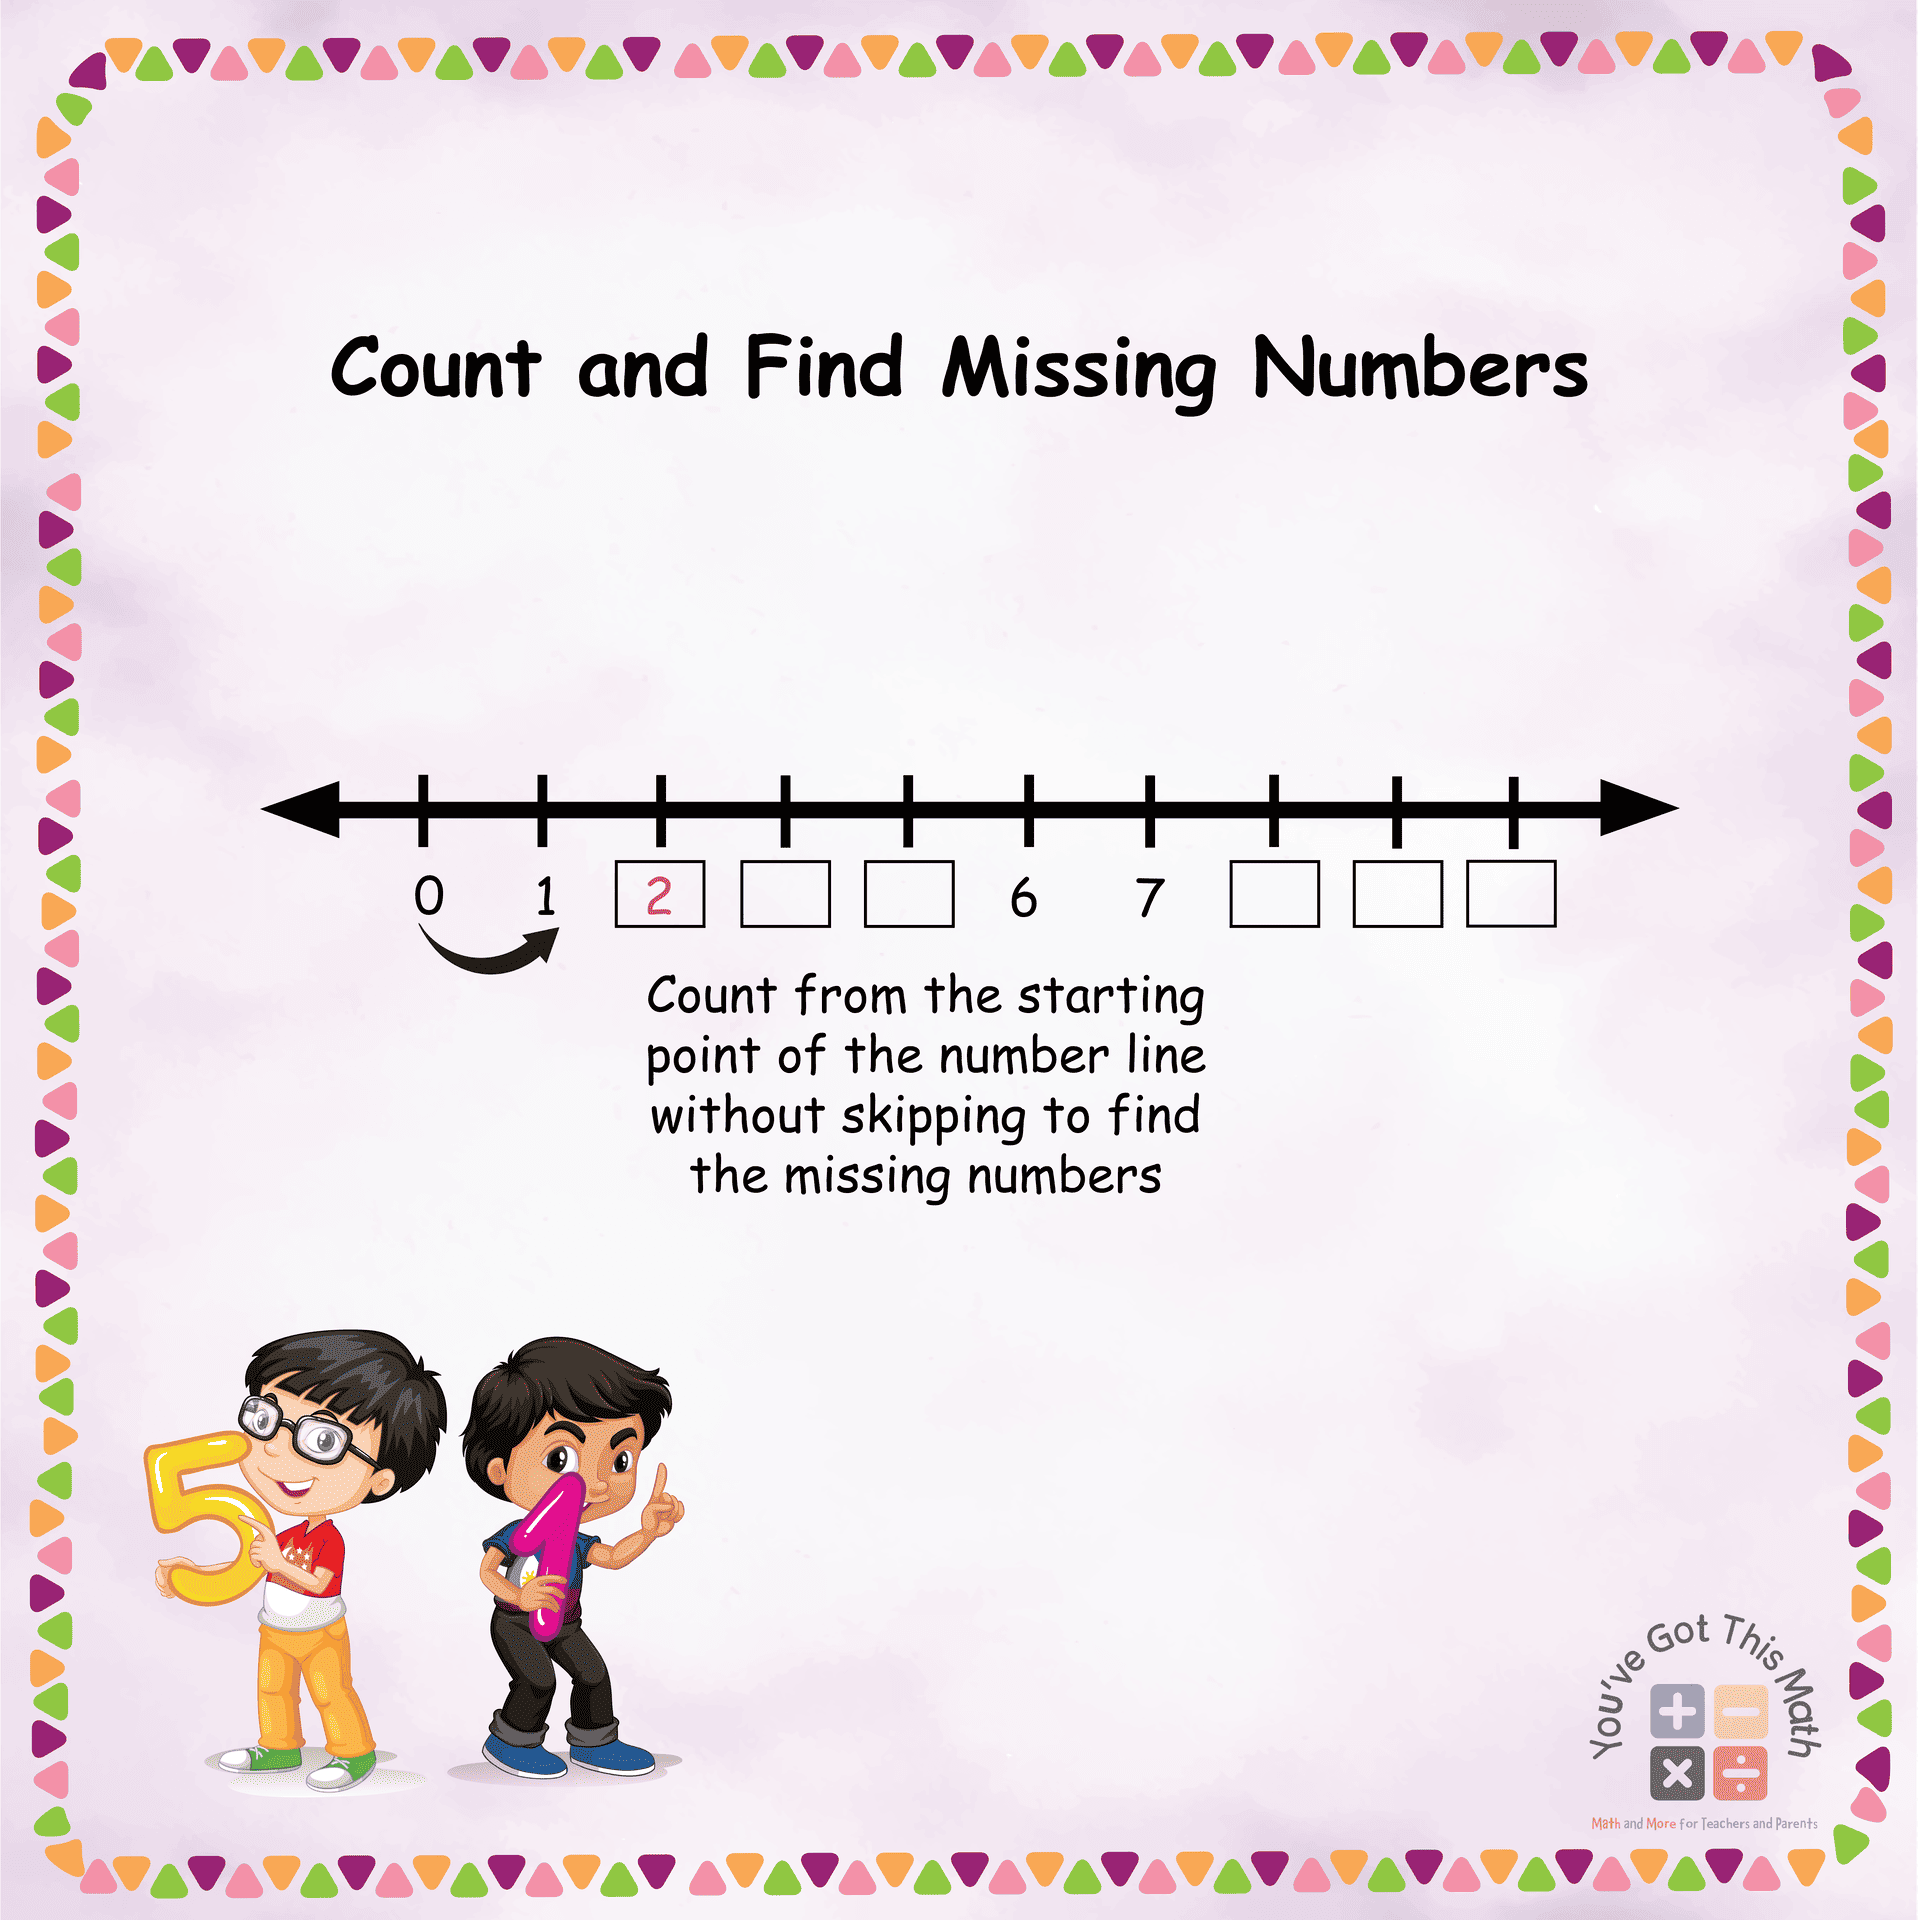 Count and Find Missing Numbers